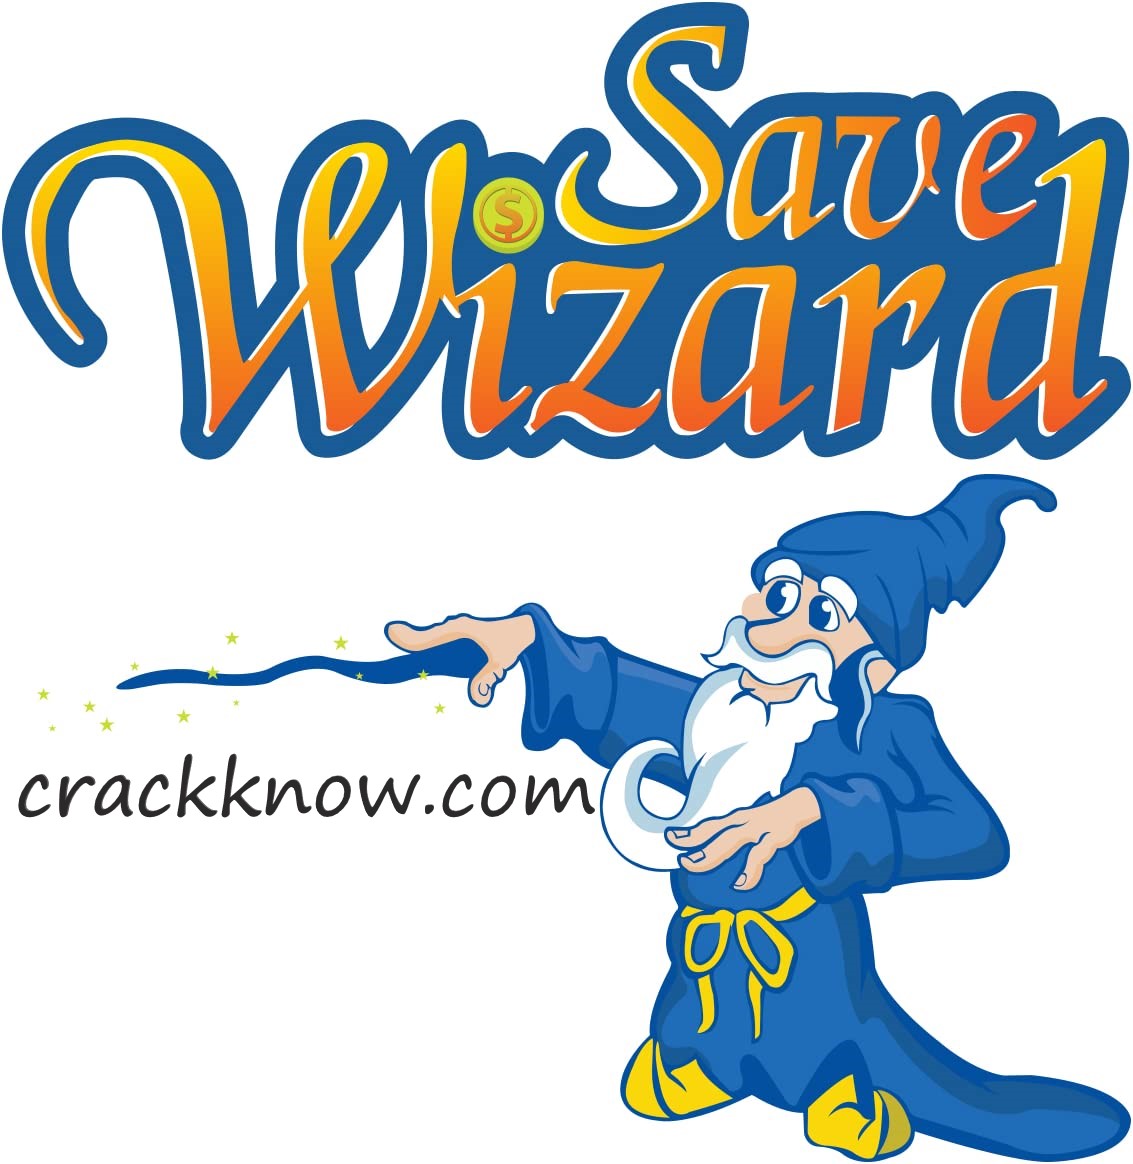 Save Wizard for PS4 MAX 1.0.6510.3 Crack Key Download Torrent 2020